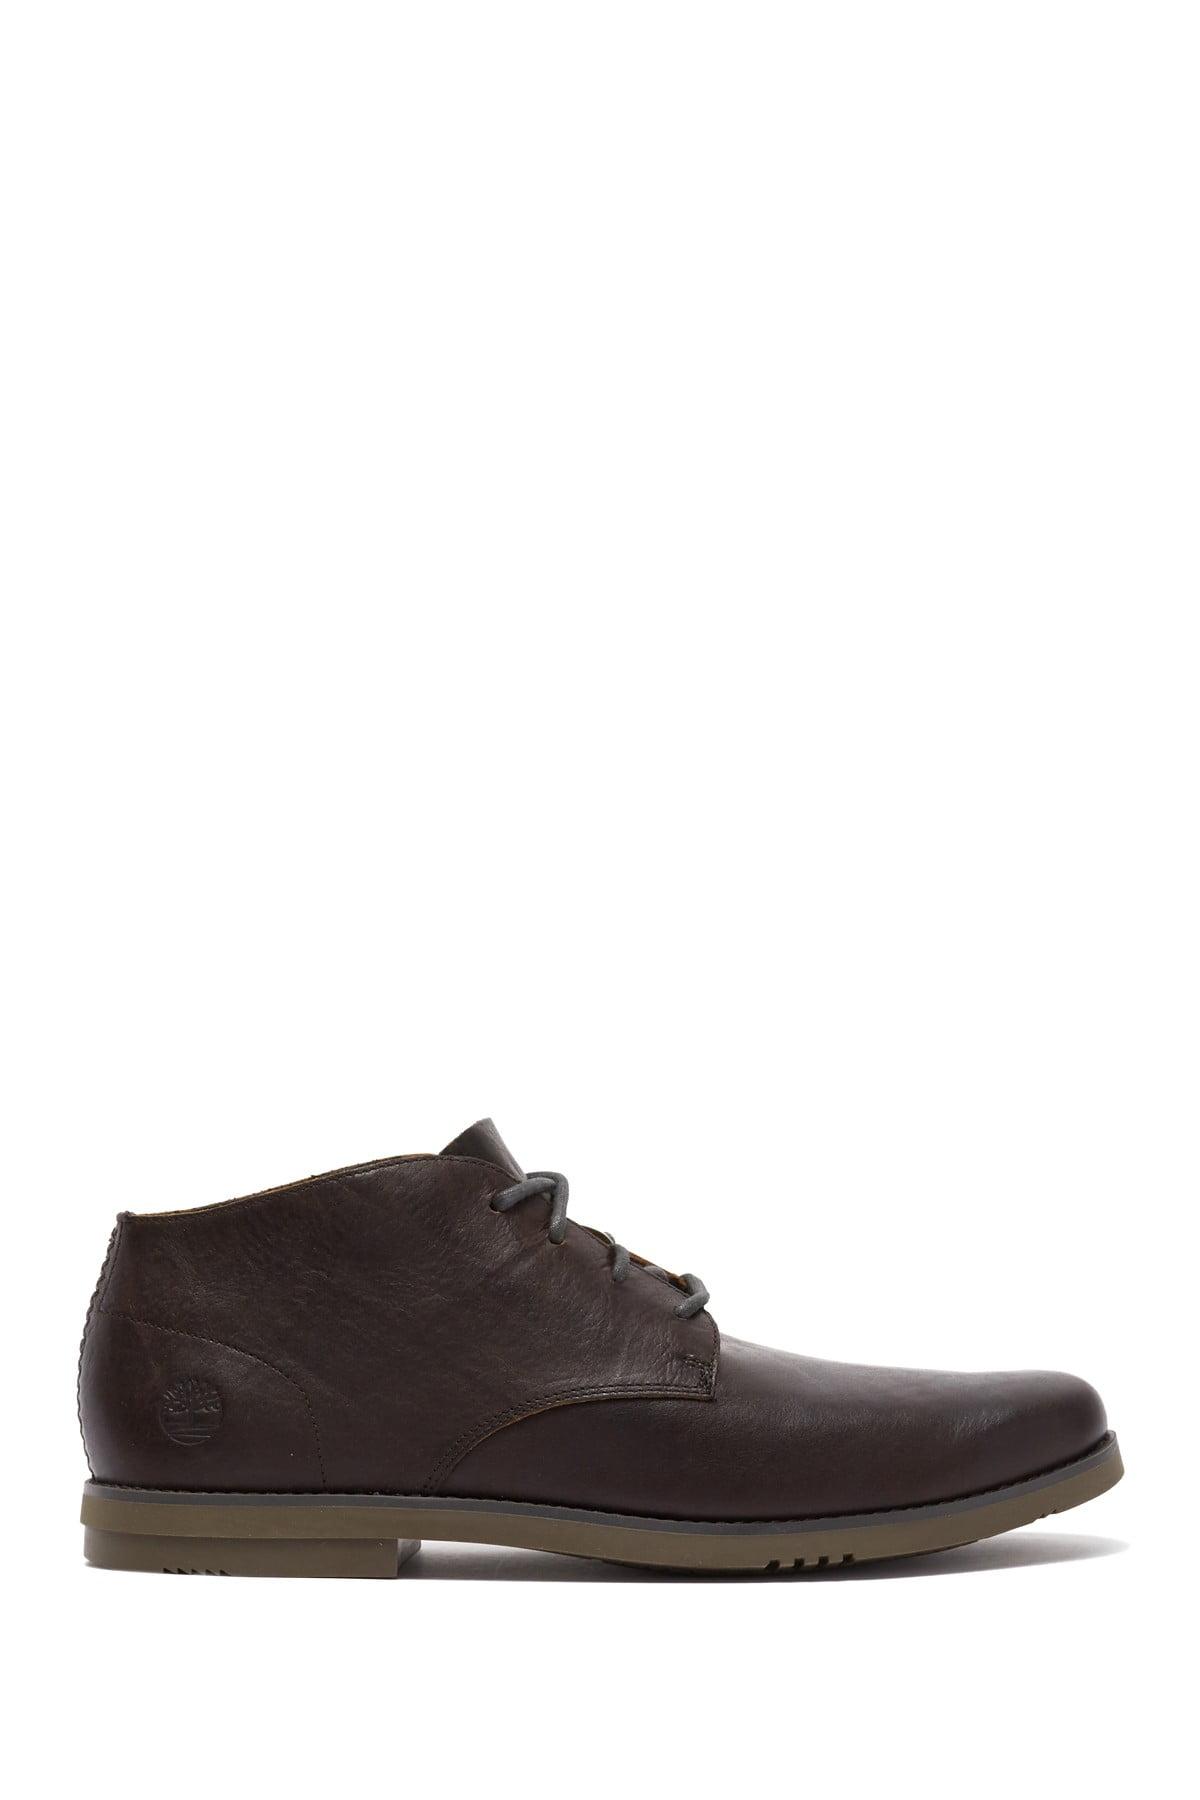 Timberland Leather Yorkdale Chukka in Black for Men - Lyst